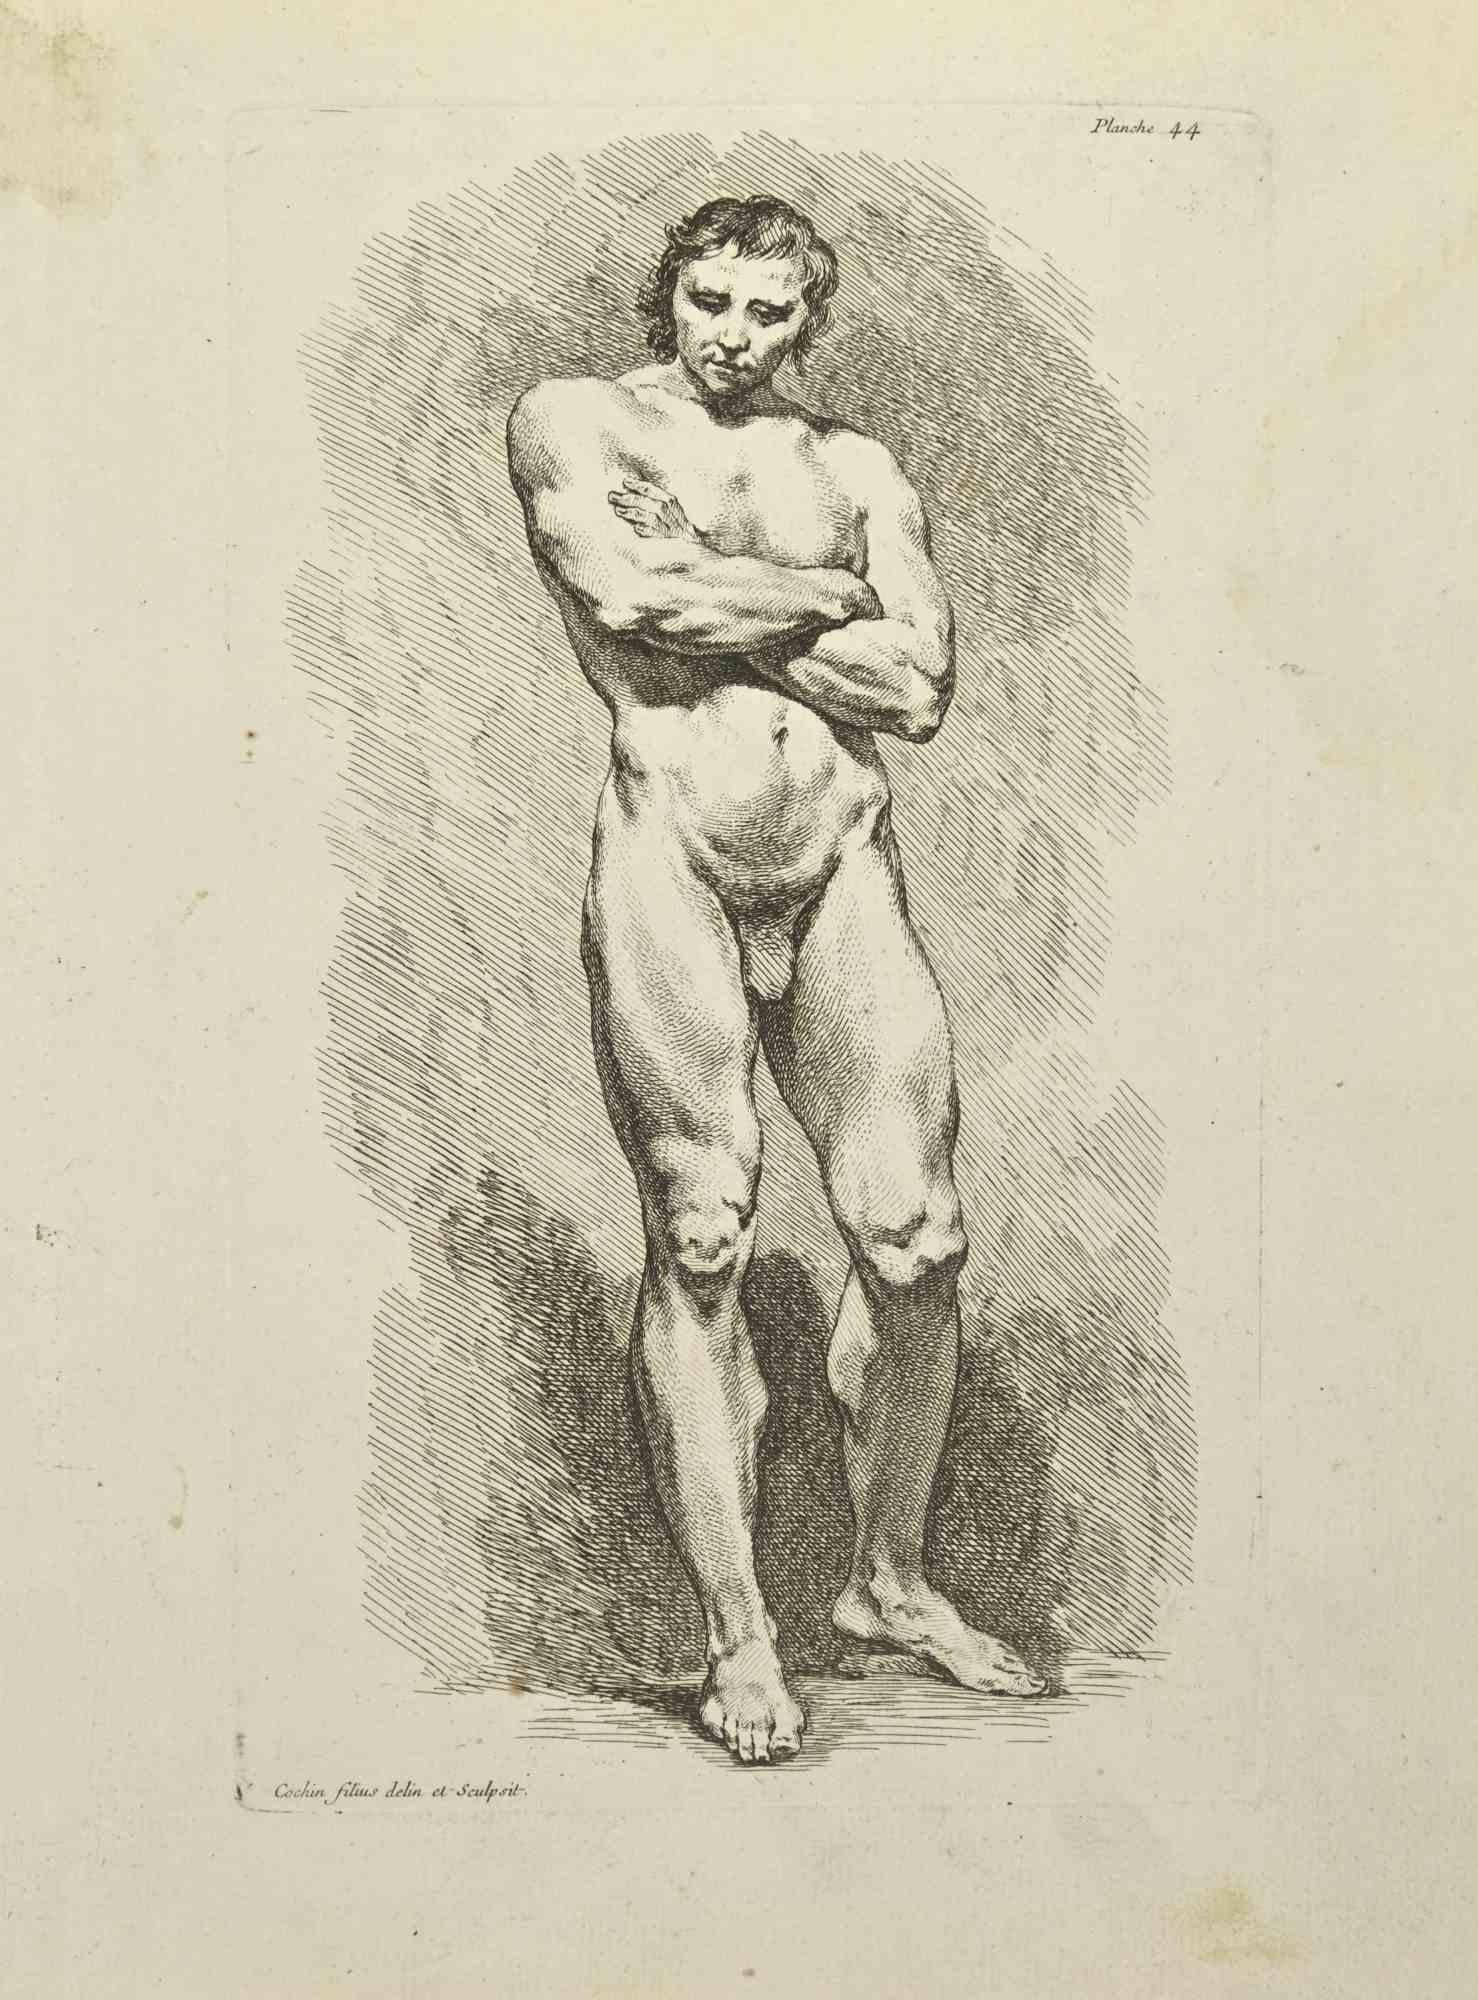 Anatomy Studies is an etching realized by Nicholas Cochin in 1755.

Signed in the plate.

Good conditions with foxing and folding.

The artwork is depicted through confident strokes.

The etching was realized for the anatomy study “JOMBERT,